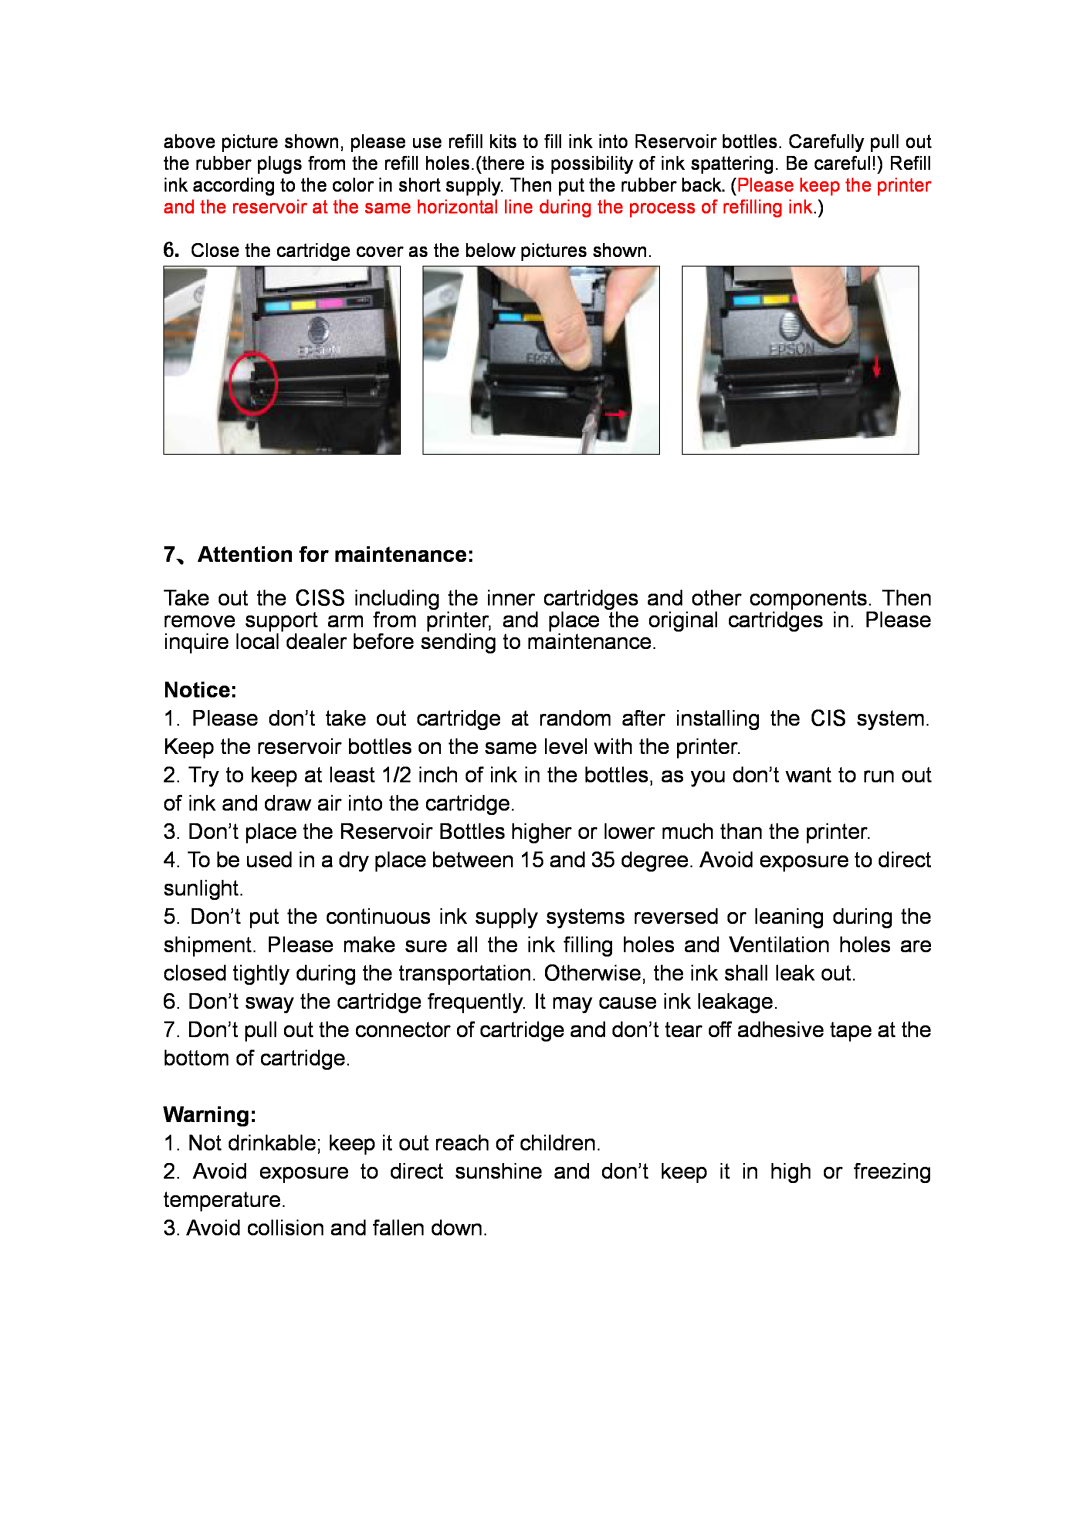 Epson c58 manual 7、Attention for maintenance 